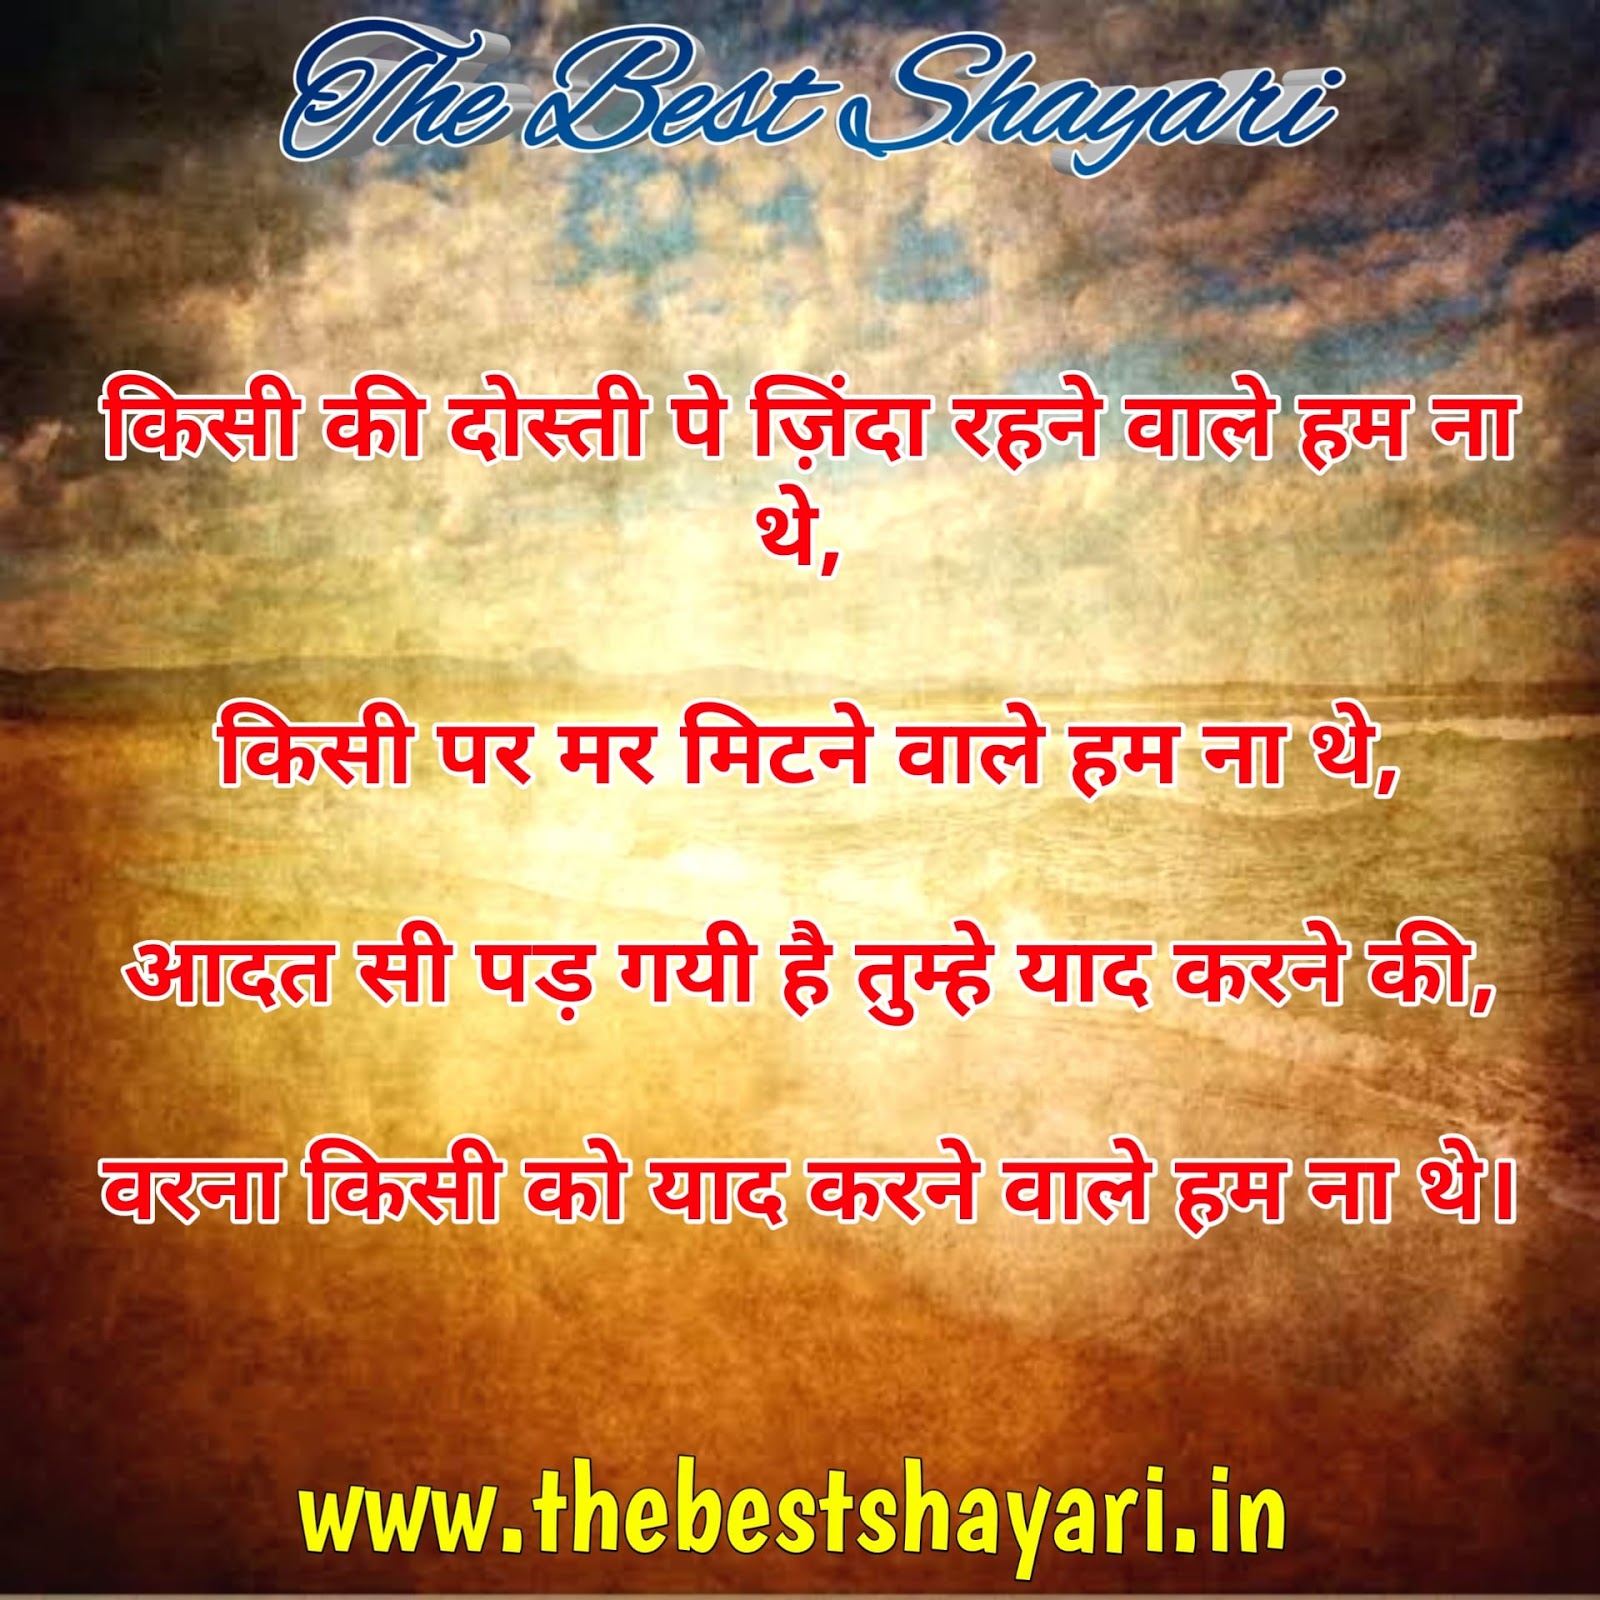 Love Shayari Image Ke Sath Download Hd Love Wali Shayari Hindi Mai If you want to get the best love shayari and share it with your friends then we are providing latest collection of shayari for love like best shayari is a type of stave, that enables a man to express his profound emotions from base of the heart through words. love shayari image ke sath download hd